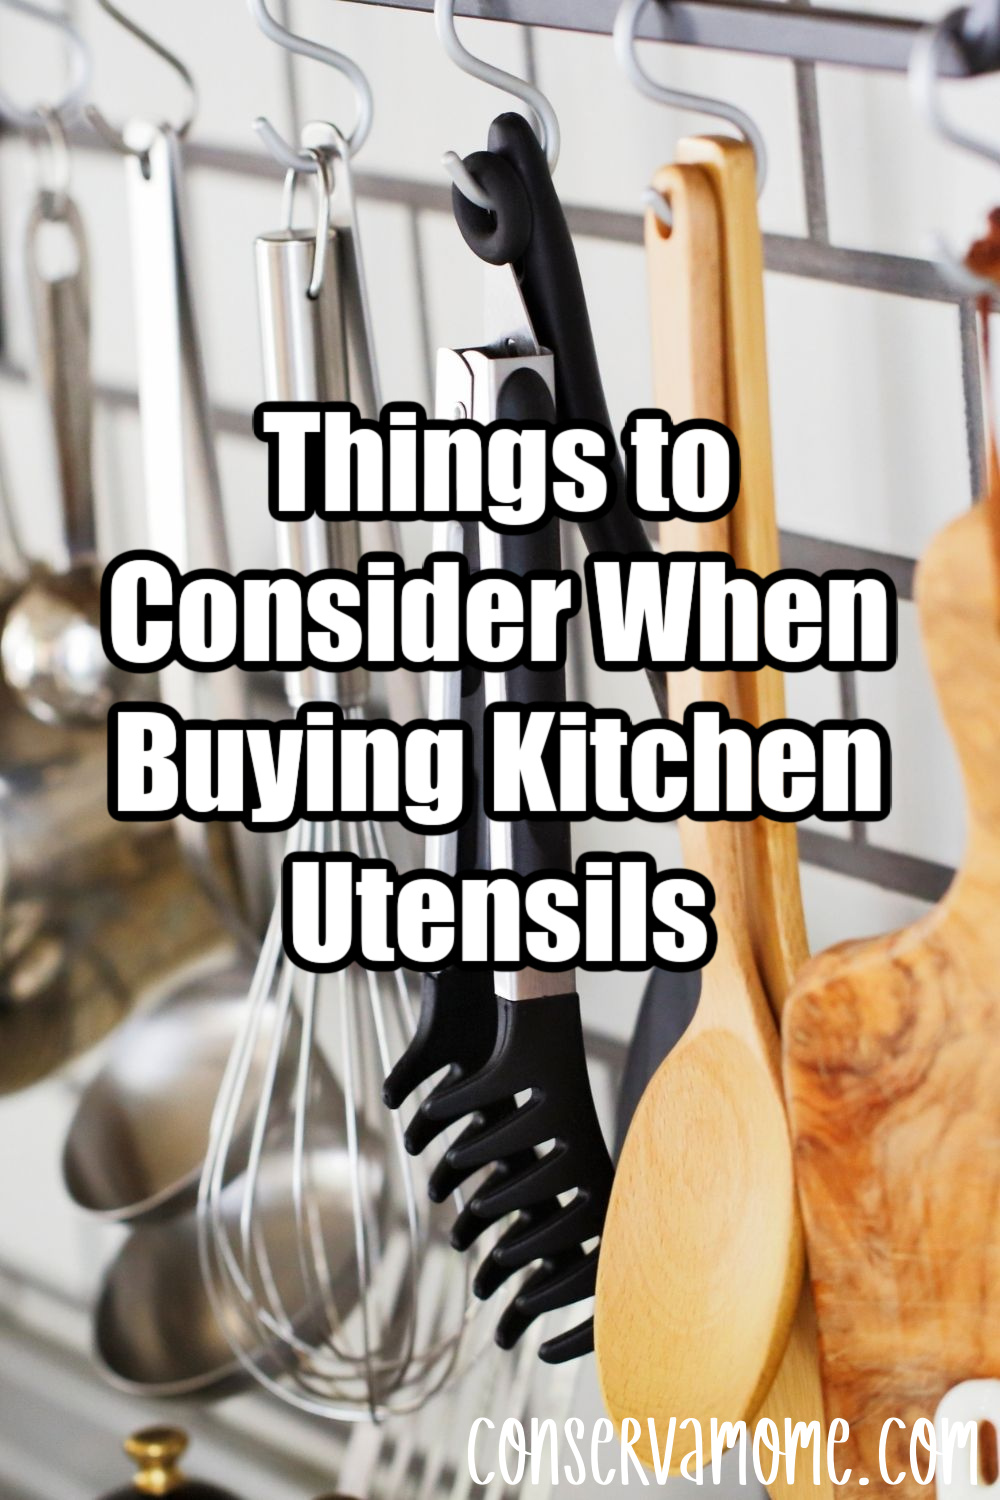 https://conservamome.com/wp-content/uploads/2021/12/Things-to-Consider-When-Buying-Kitchen-Utensils.jpg